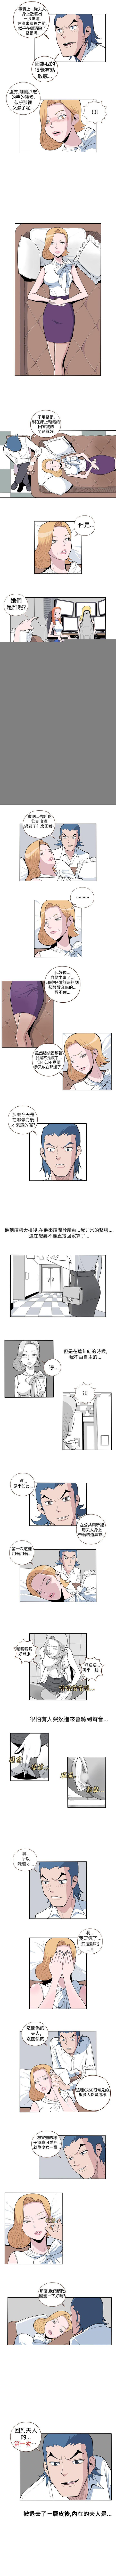 Her 淫亂魔鬼 1-29 Tributo - Page 4